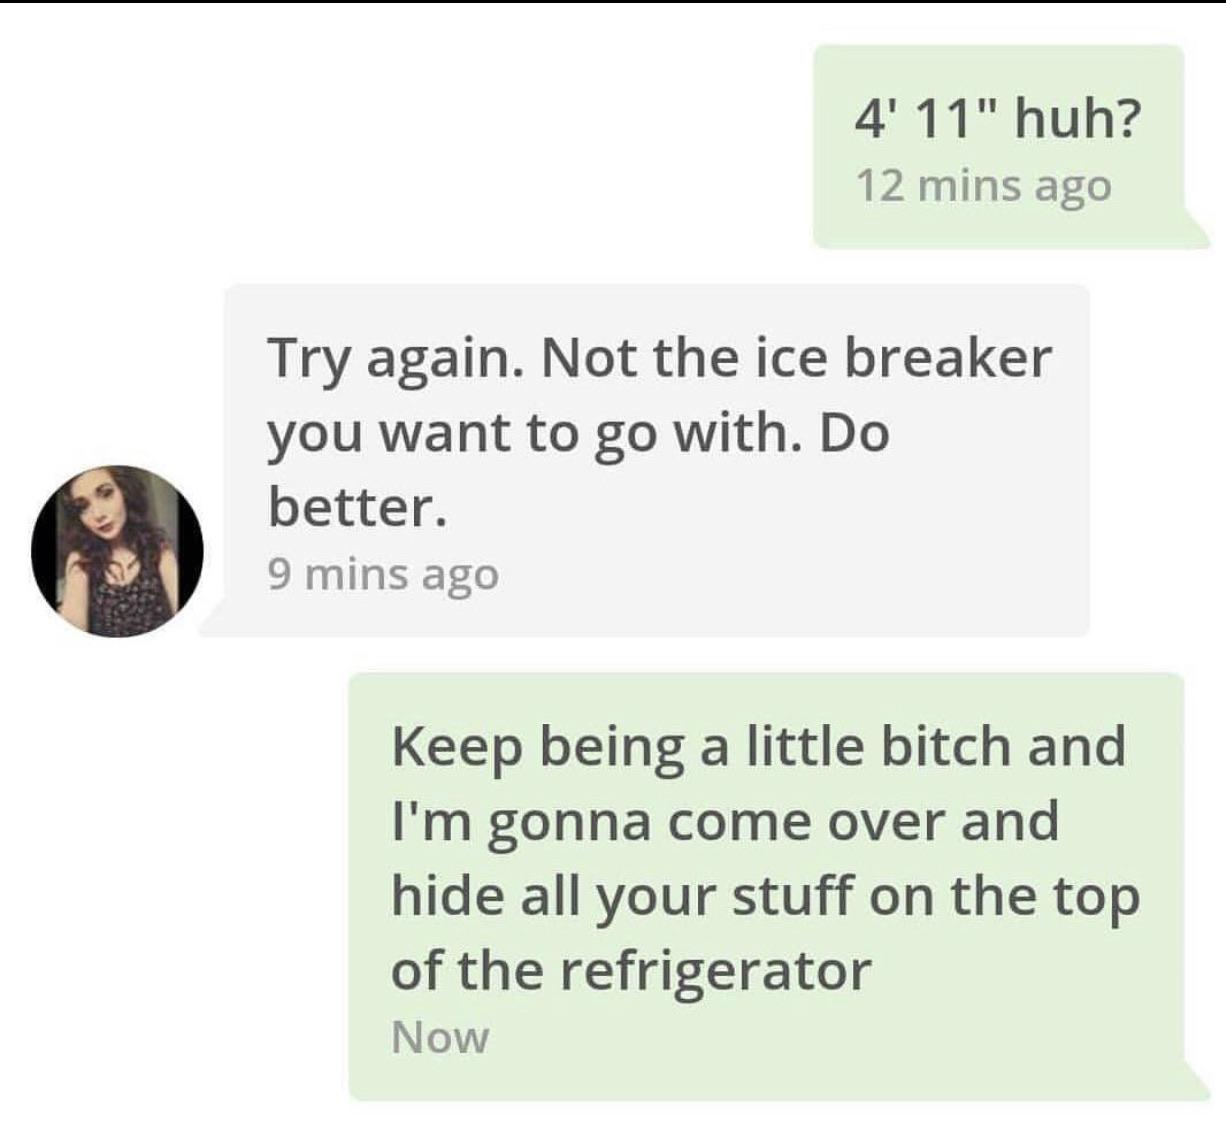 pckeeper - 4' 11" huh? 12 mins ago Try again. Not the ice breaker you want to go with. Do better. 9 mins ago Keep being a little bitch and I'm gonna come over and hide all your stuff on the top of the refrigerator Now